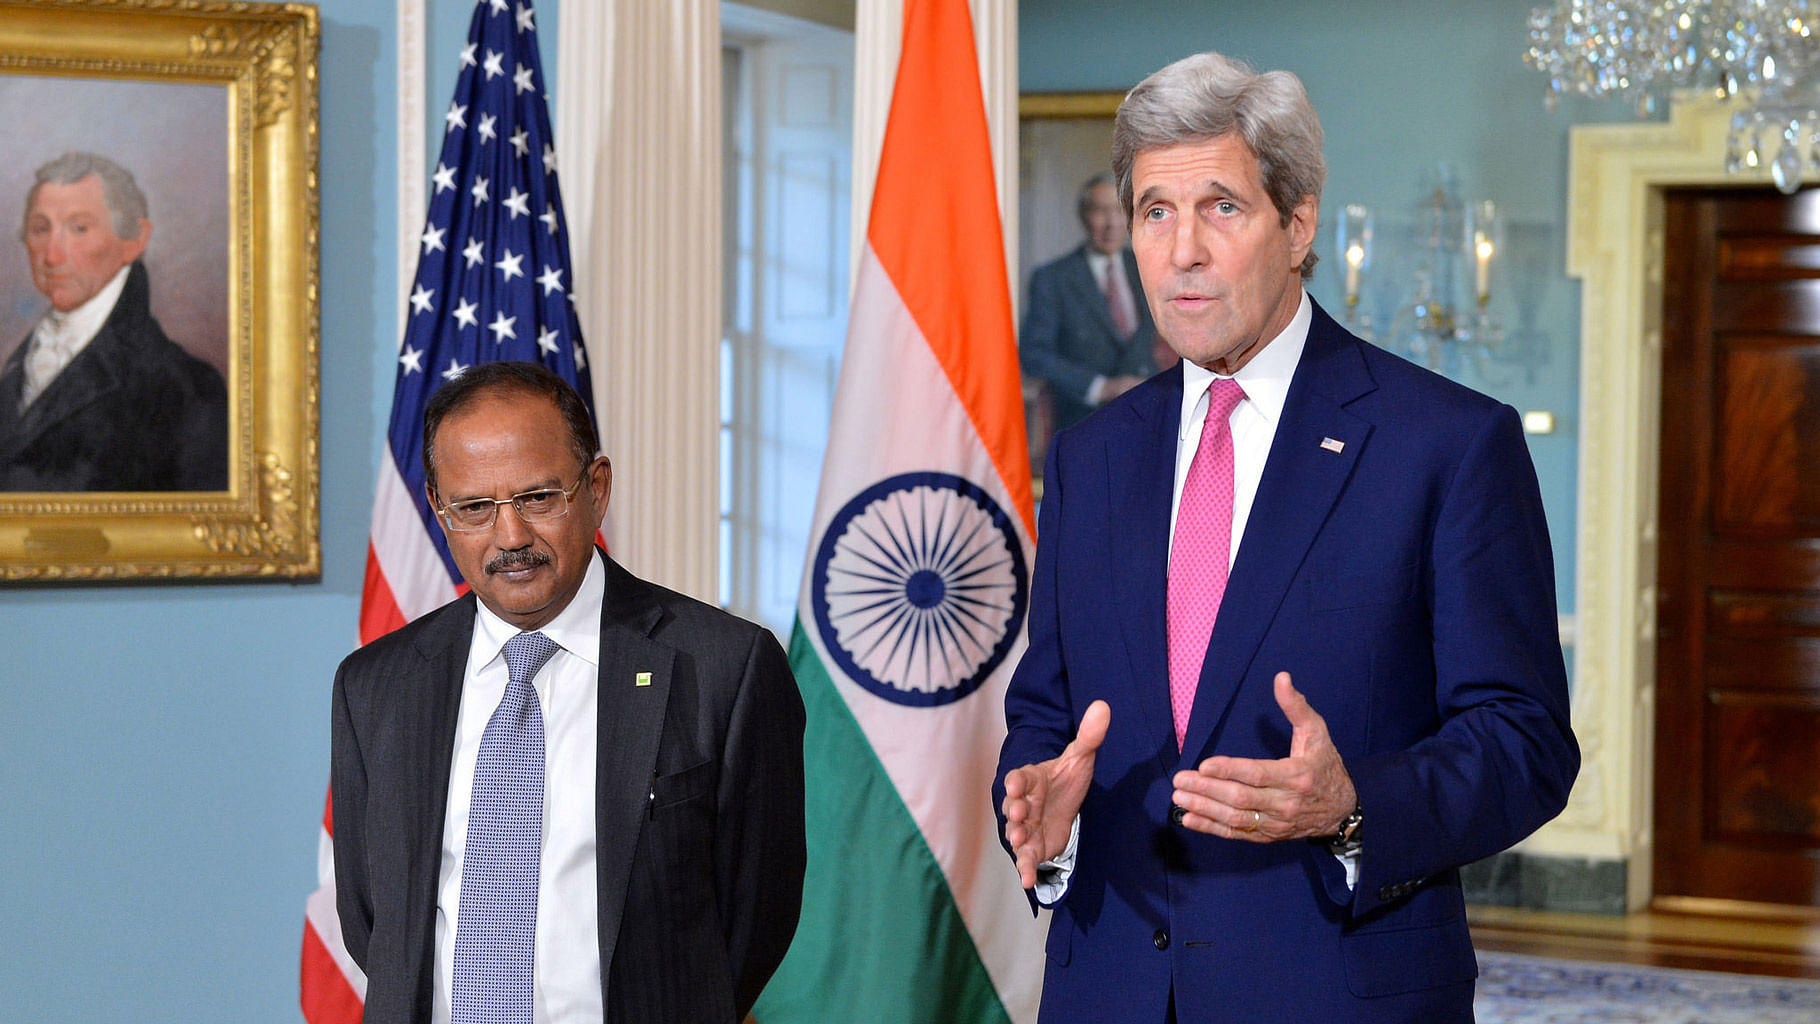 File photo of the US Secretary of State John Kerry (left) and India’s National Security Advisor Ajit Doval. (Photo: <a href="https://www.flickr.com/photos/statephotos/26140946435/in/photostream/">US Department of State</a>)